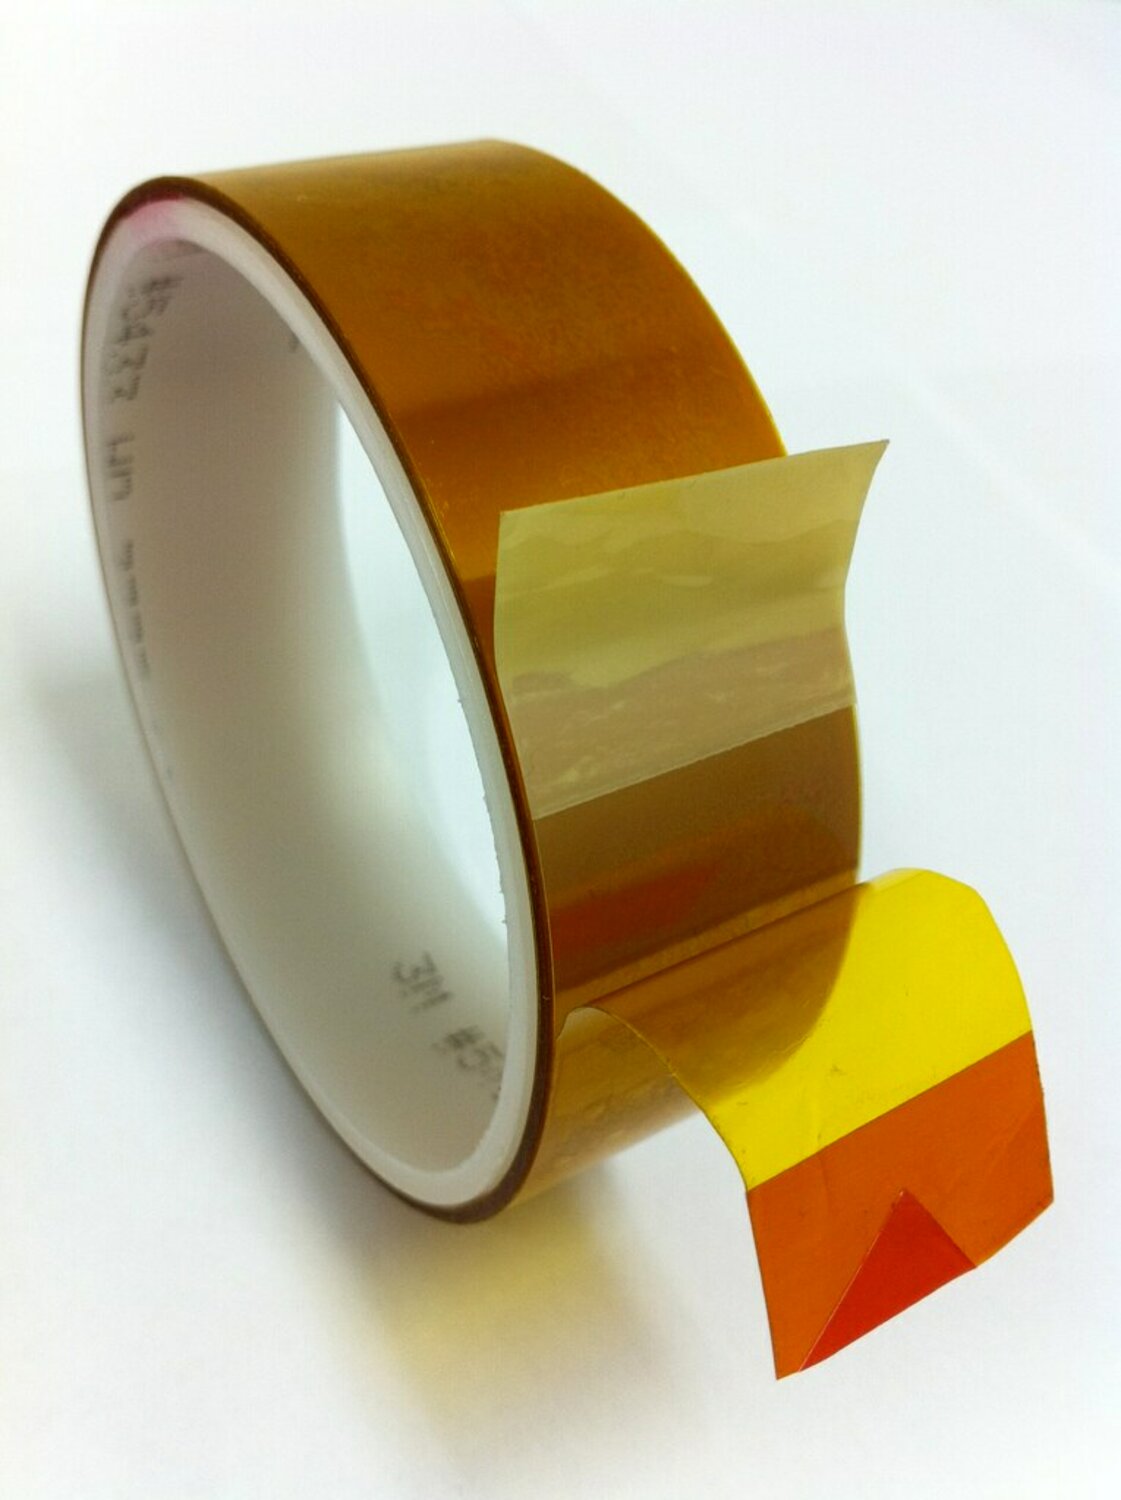 7010373501 - 3M Linered Low-Static Polyimide Film Tape 5433 Amber, 1-1/2 in x 36 yds
x 2.7 mil, 6/Case, Bulk